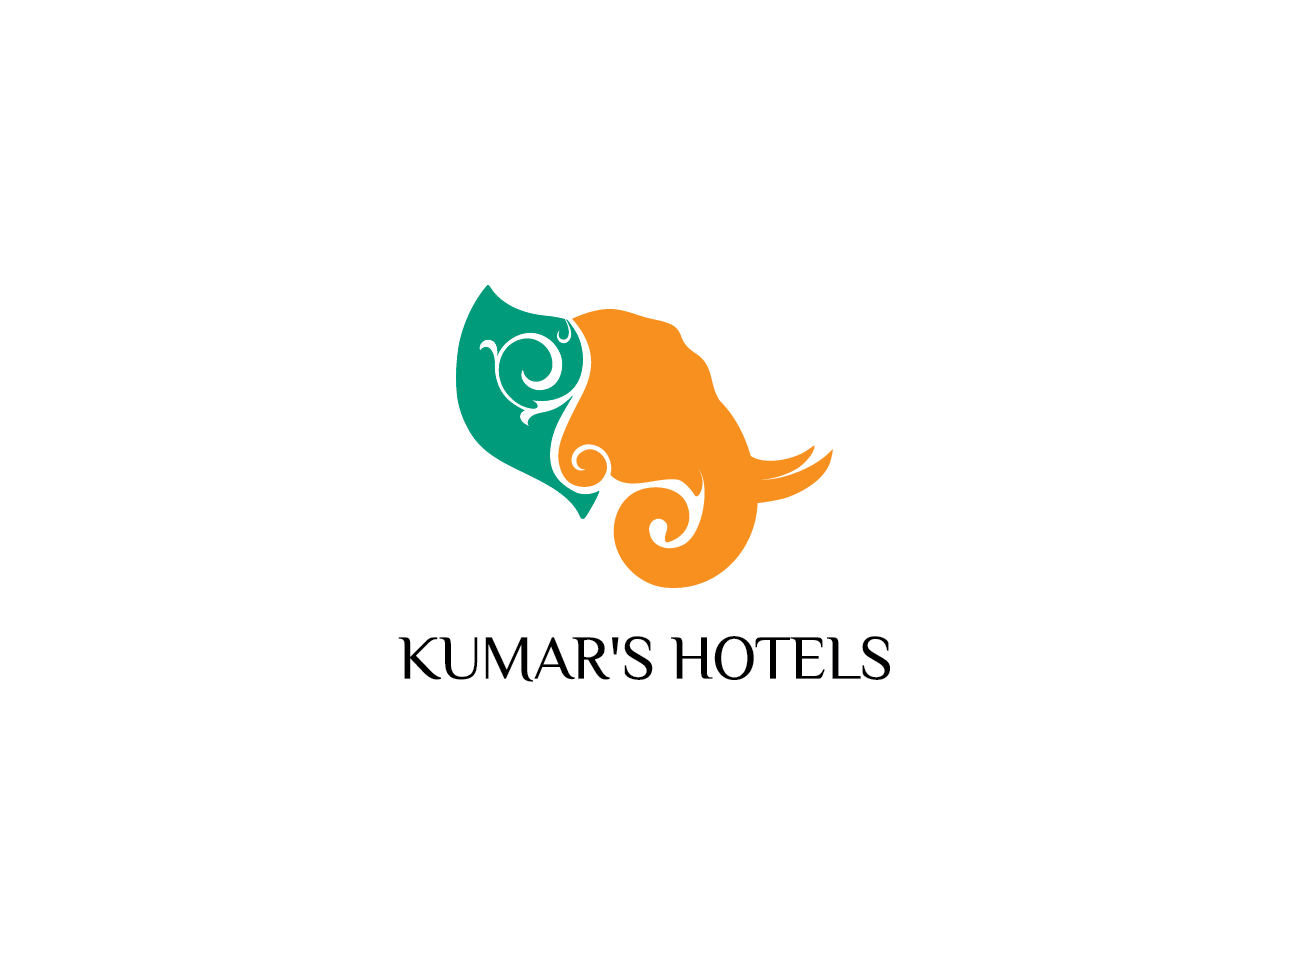 Indian Hotel Logo - Serious, Conservative, Hotel Logo Design for Kumar's Hotels by ...